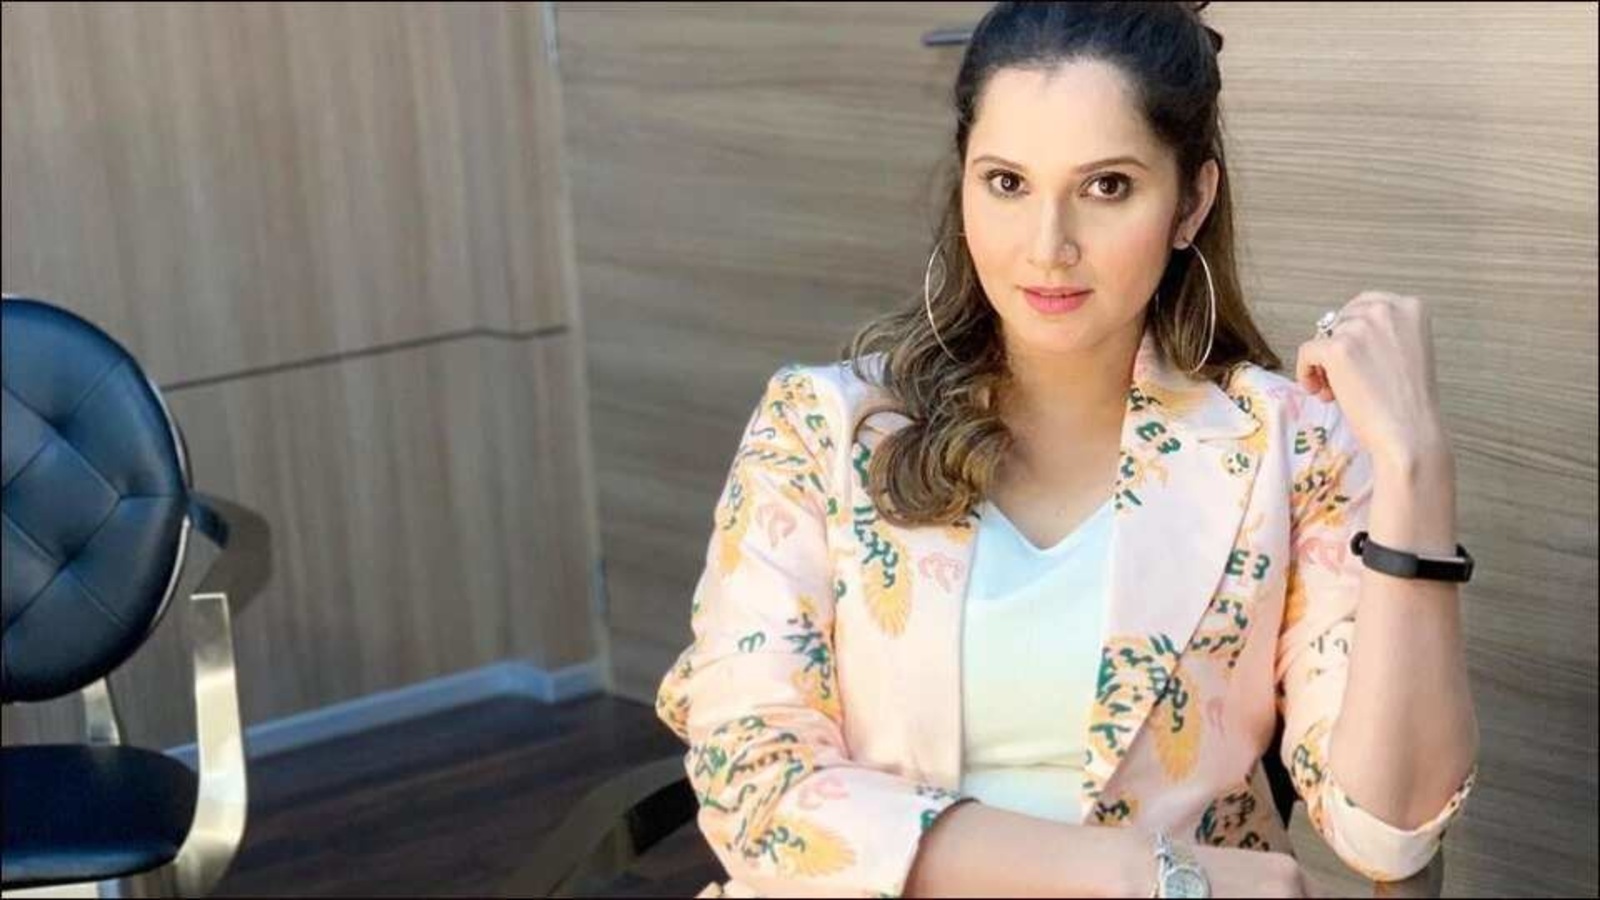 Sania Mirza Open Sex - From weightlifting to tennis and glamour, here's a day in Sania Mirza's  life - Hindustan Times